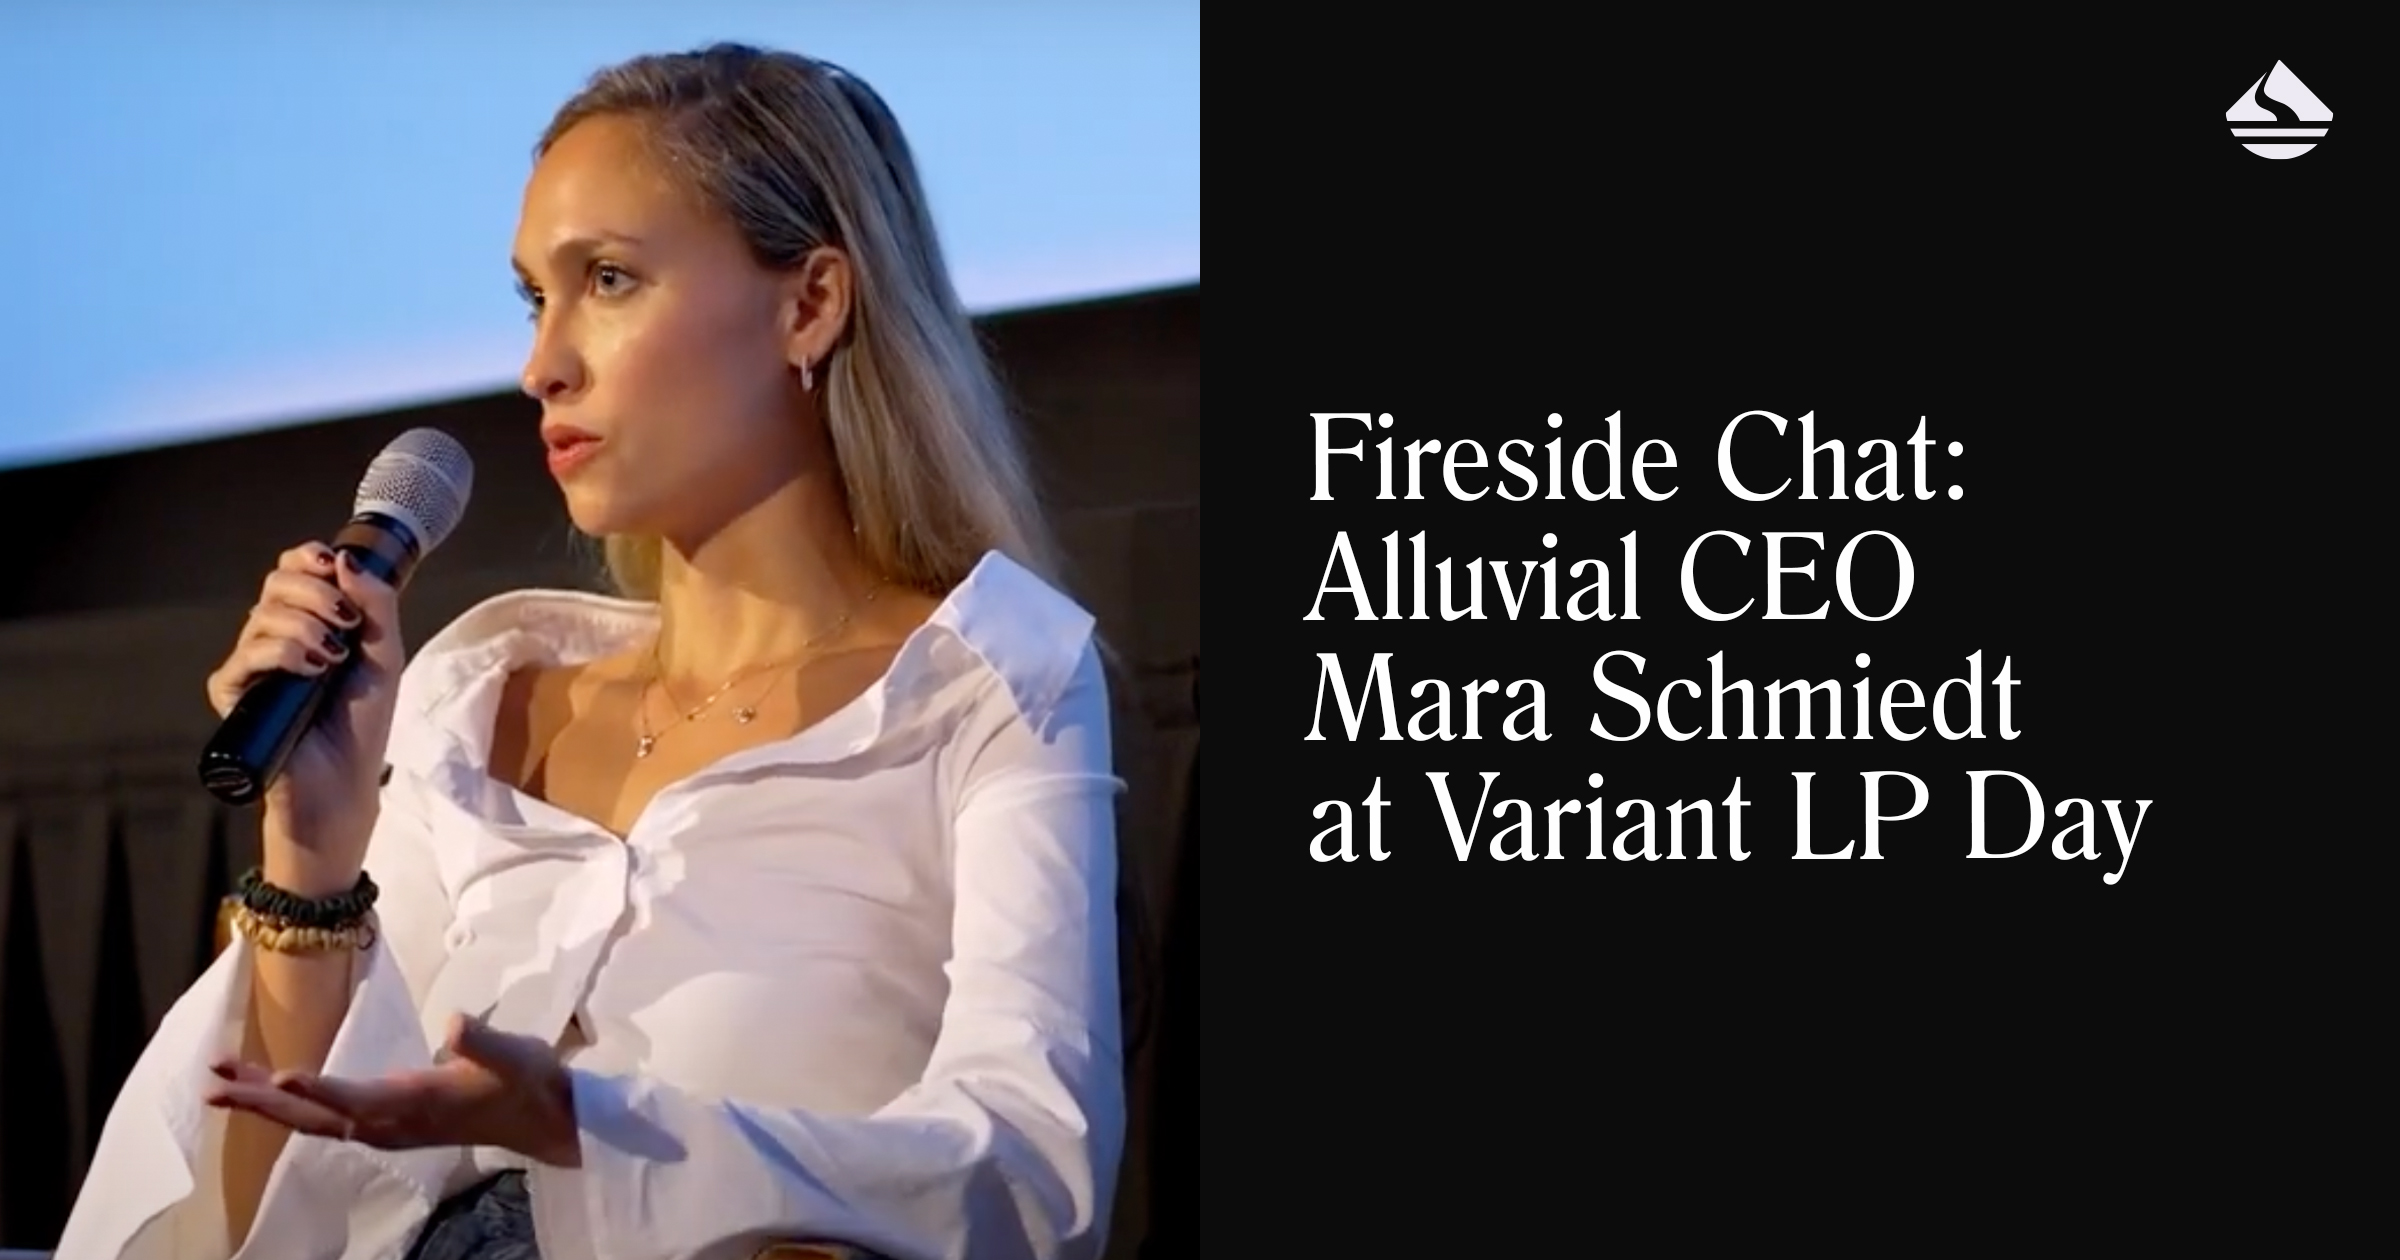 Fireside Chat: Alluvial CEO Mara Schmiedt at Variant LP Day 2023